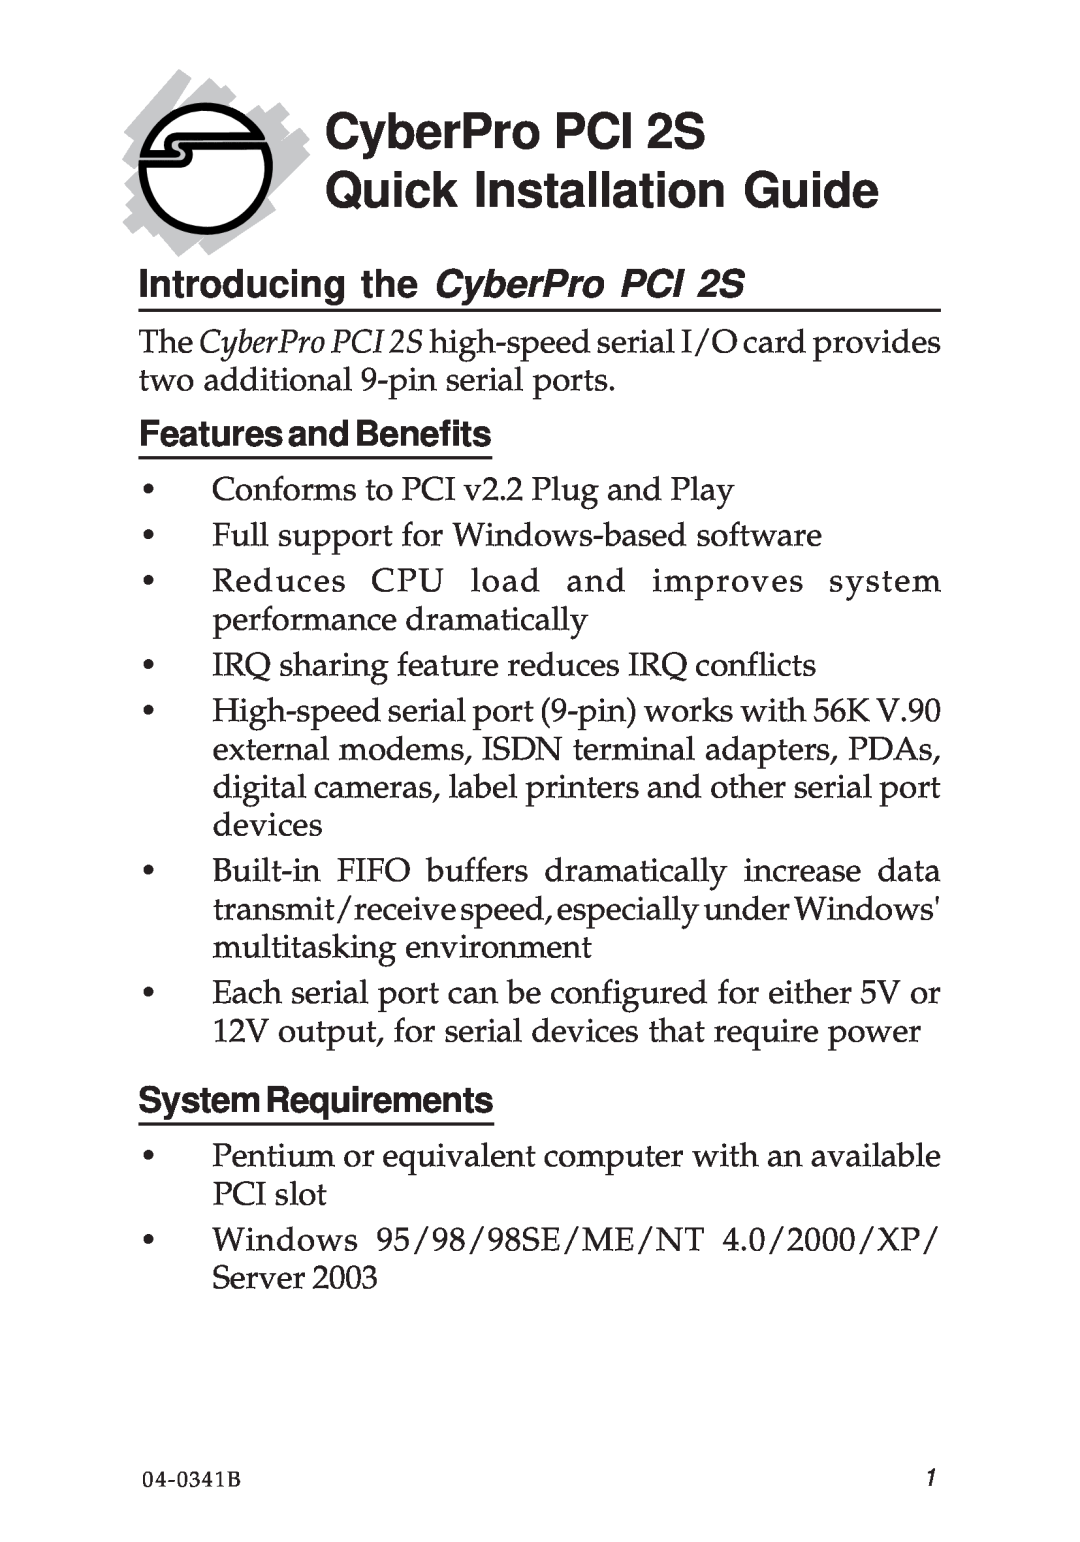 SIIG manual Introducing the CyberPro PCI 2S, Features and Benefits, SystemRequirements 